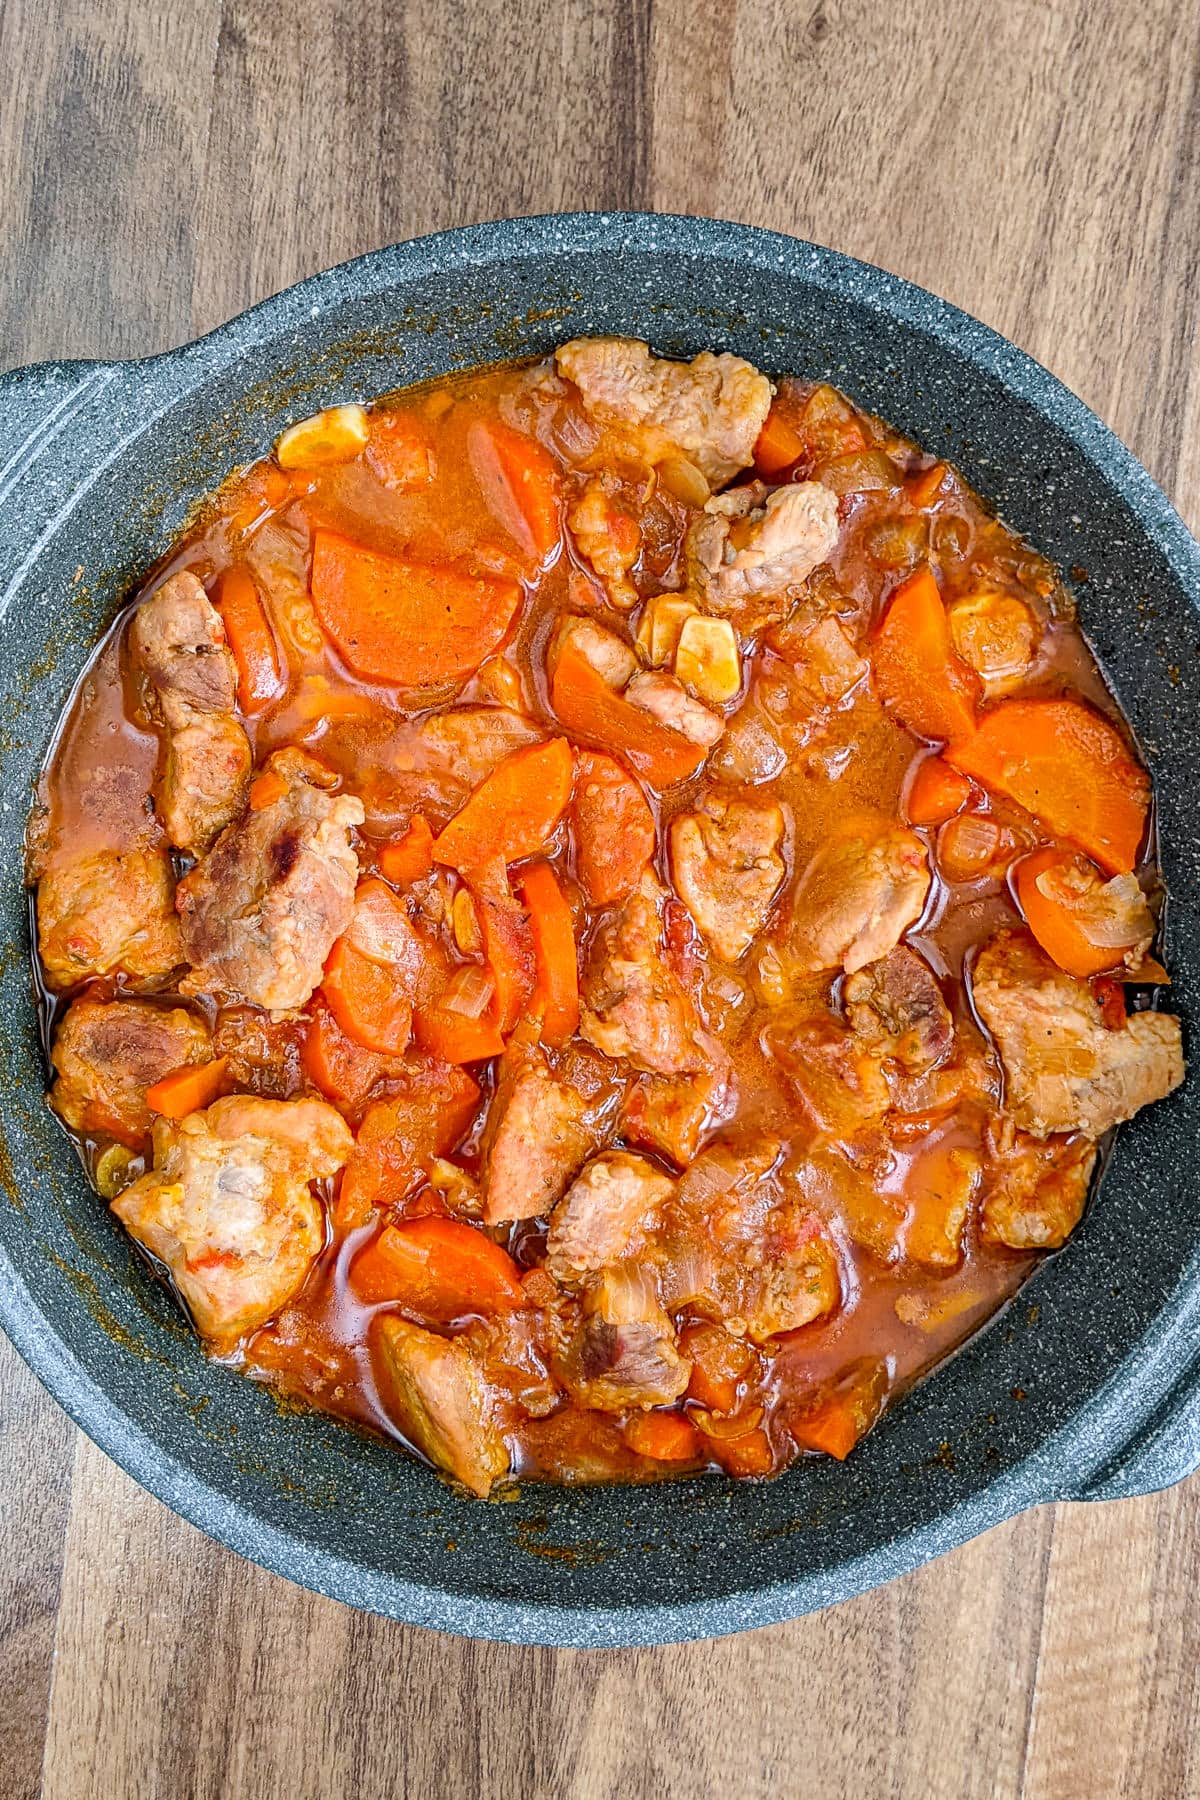 Top view of a sauce pan with pork stew.